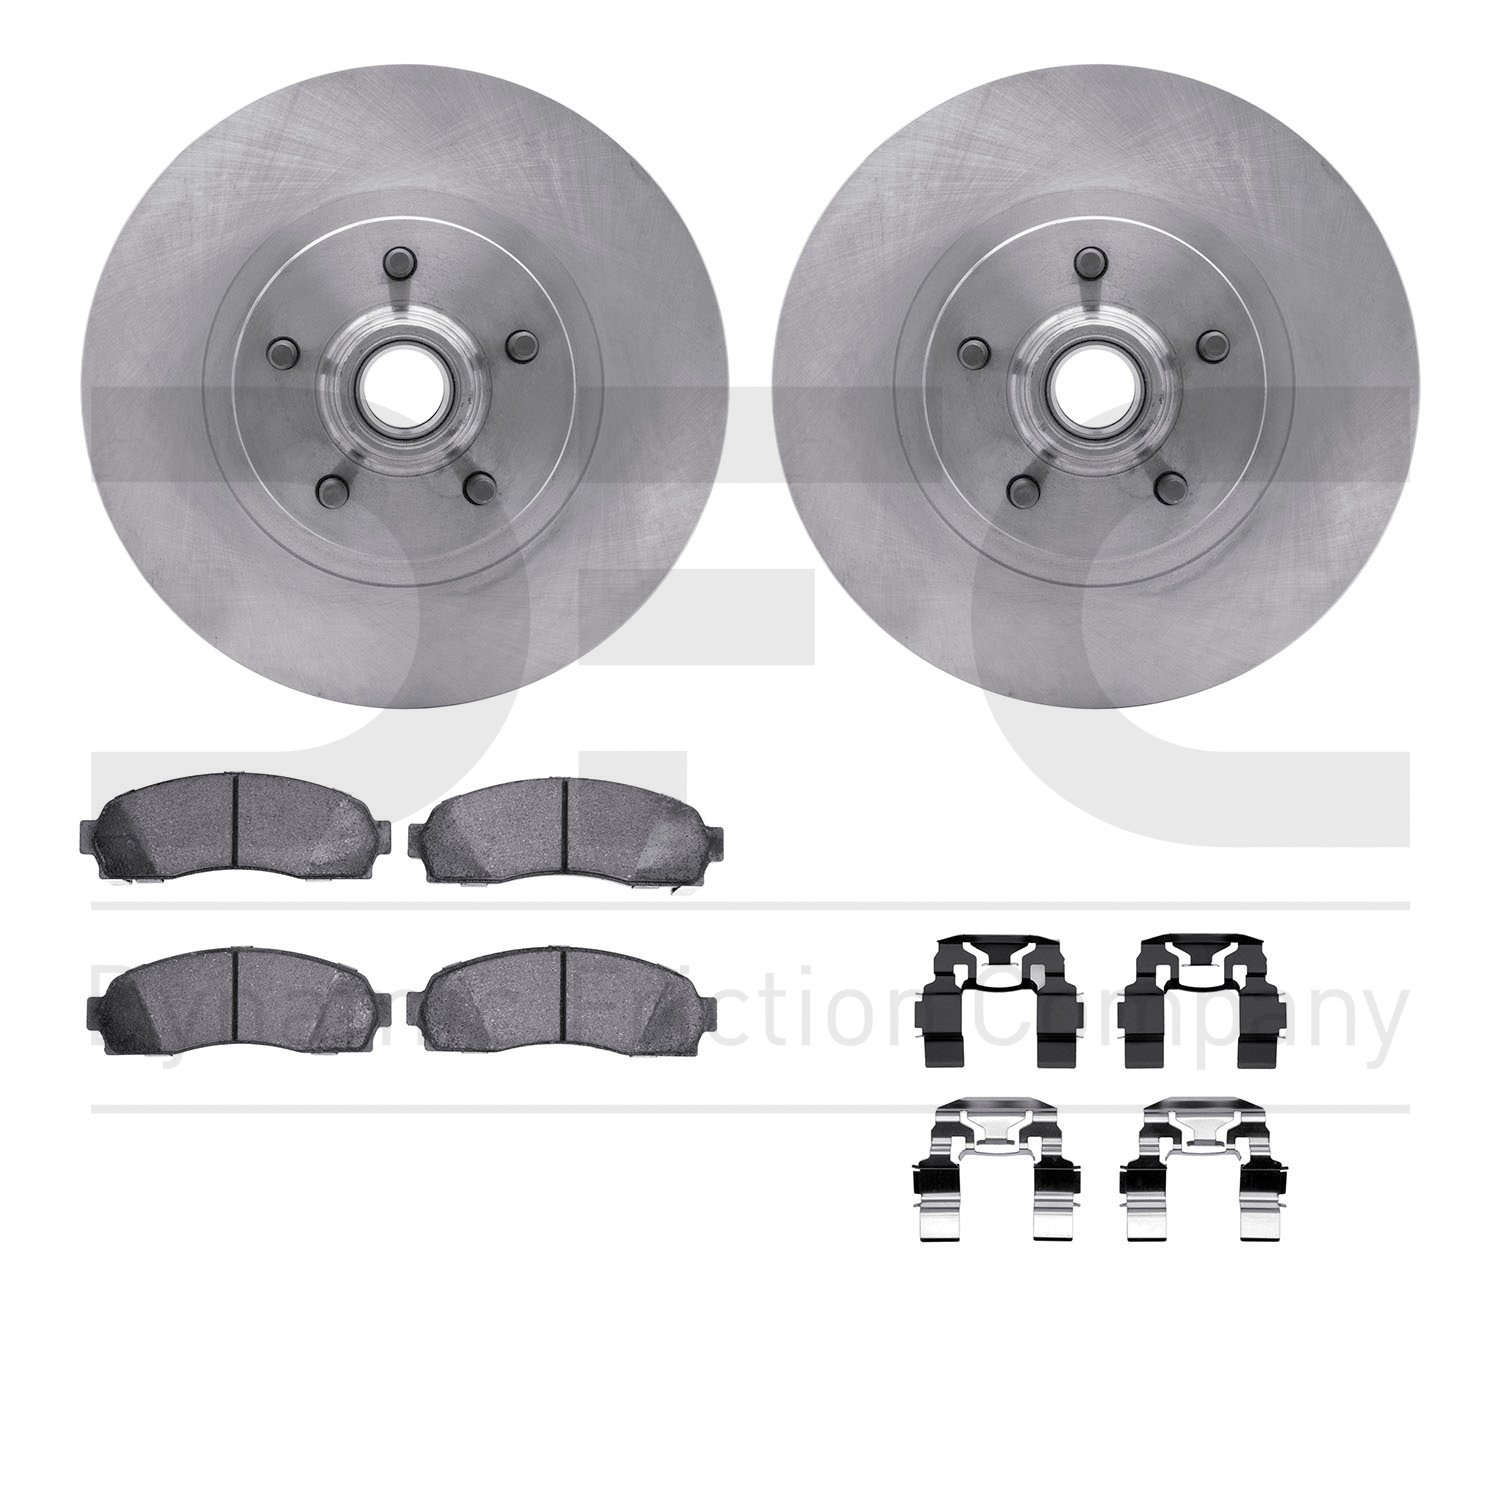 6412-54176 Brake Rotors with Ultimate-Duty Brake Pads Kit & Hardware, 2001-2005 Ford/Lincoln/Mercury/Mazda, Position: Front